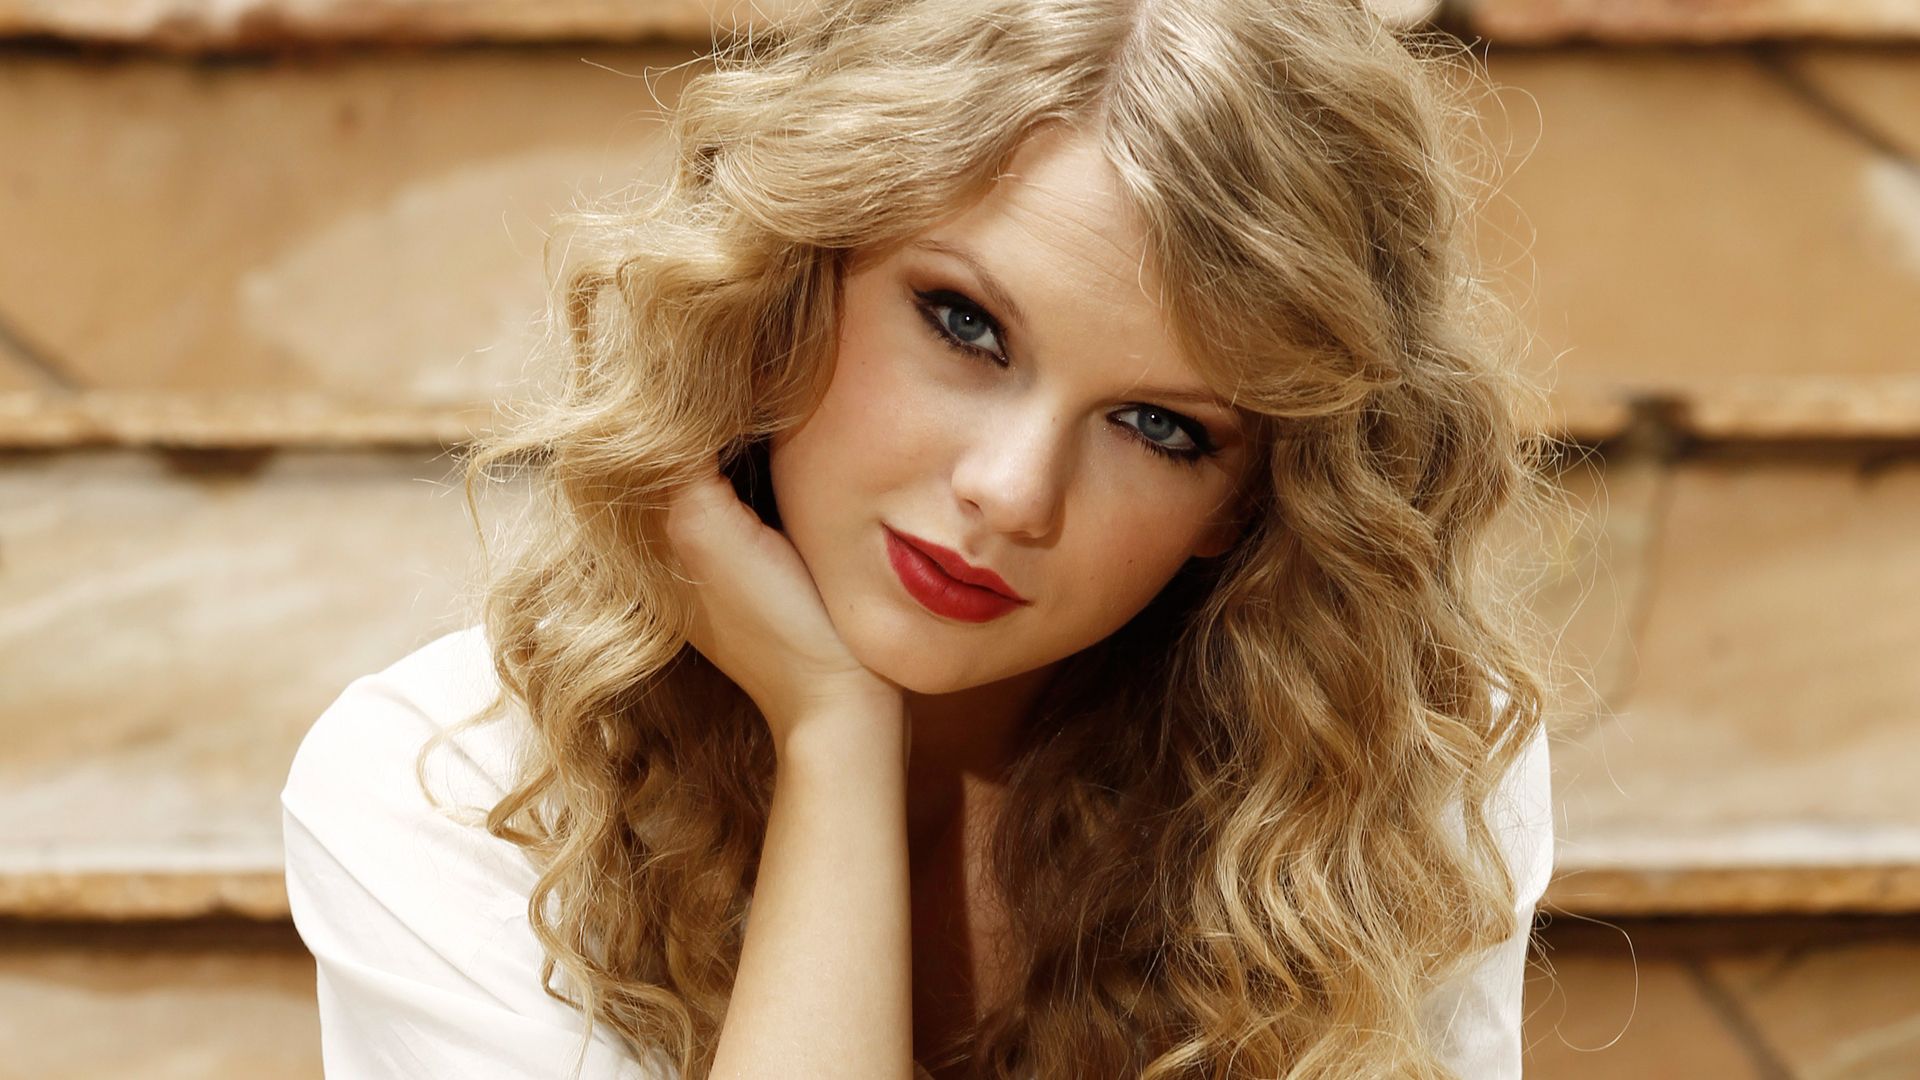 Taylor Swift HD wallpapers free download